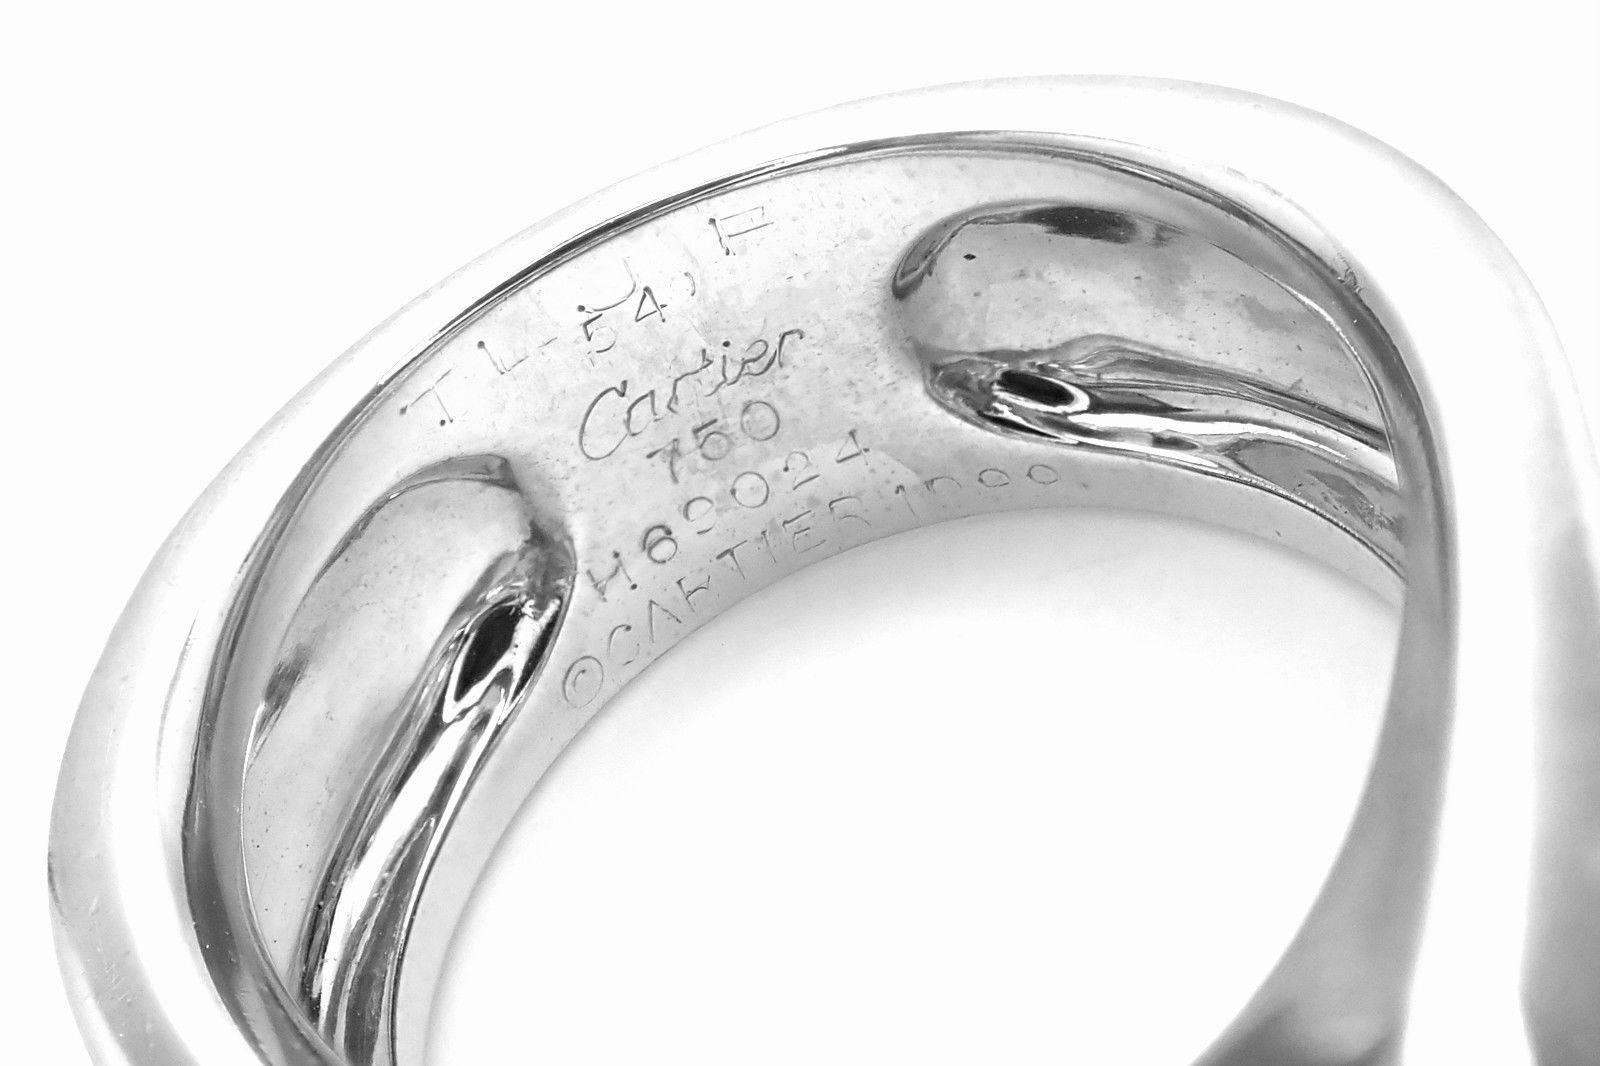 18k White Gold Large Chalcedony Ring by Cartier. 
With 1 oval chalcedony 14 x 5 mm.
Details: 
Ring Size: 7 US or 54 (European)
Weight: 18.6 grams
Stamped Hallmarks: Cartier 750 54 H69024 Cartier 1999
*Free Shipping within the United States* 
YOUR